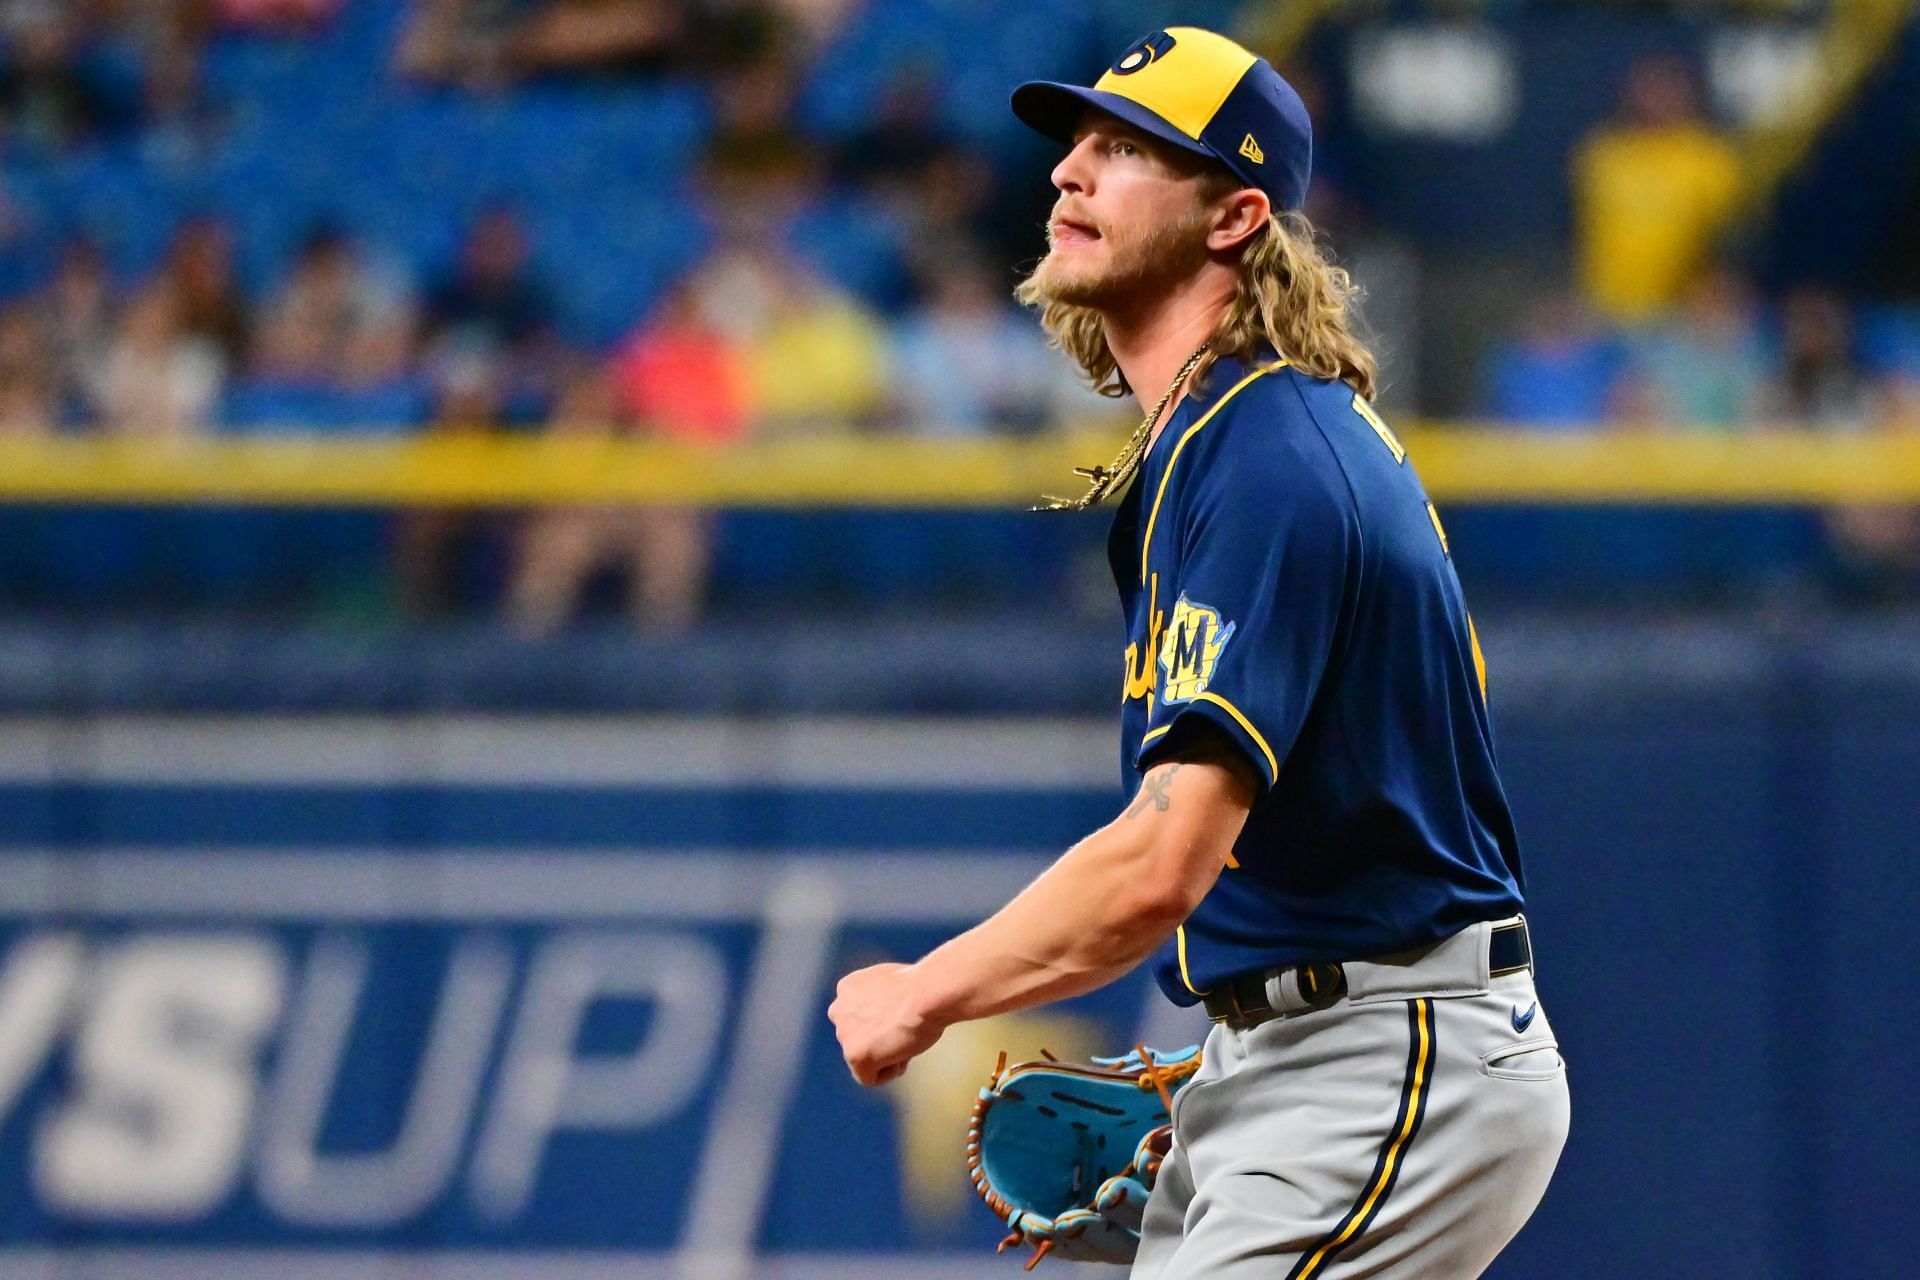 Did clay Holmes retire or something?” “He just blew 2 games vs the Cubs” -  MLB Twitter rips into the league's feed for suggesting that Josh Hader is  the best closer in baseball